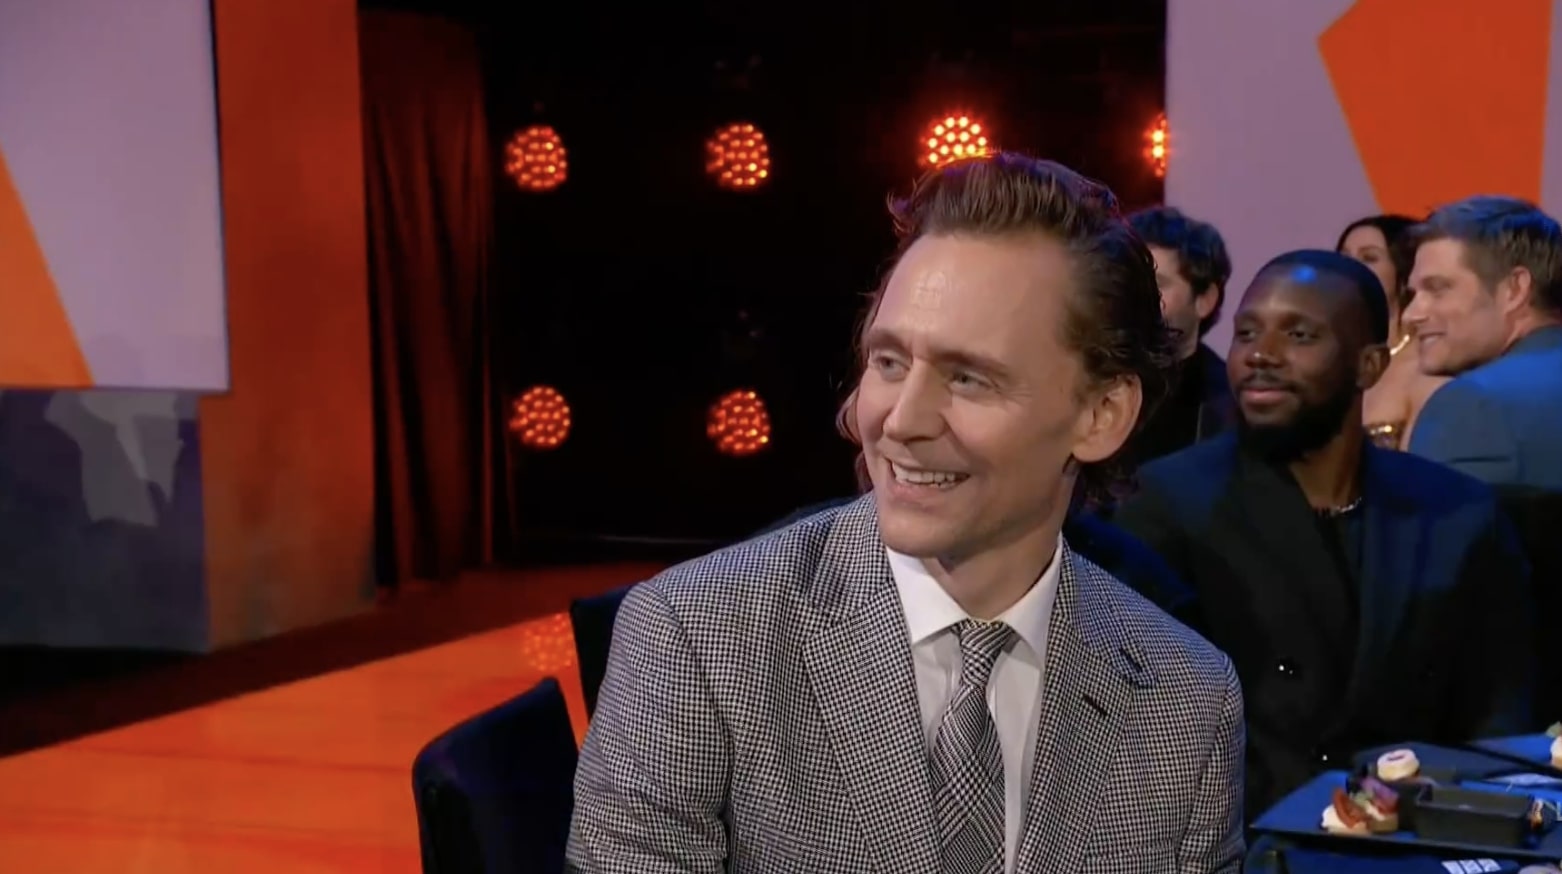 Tom Hiddleston was caught 'cringing' by the cameras as his ex Taylor Swift received praise